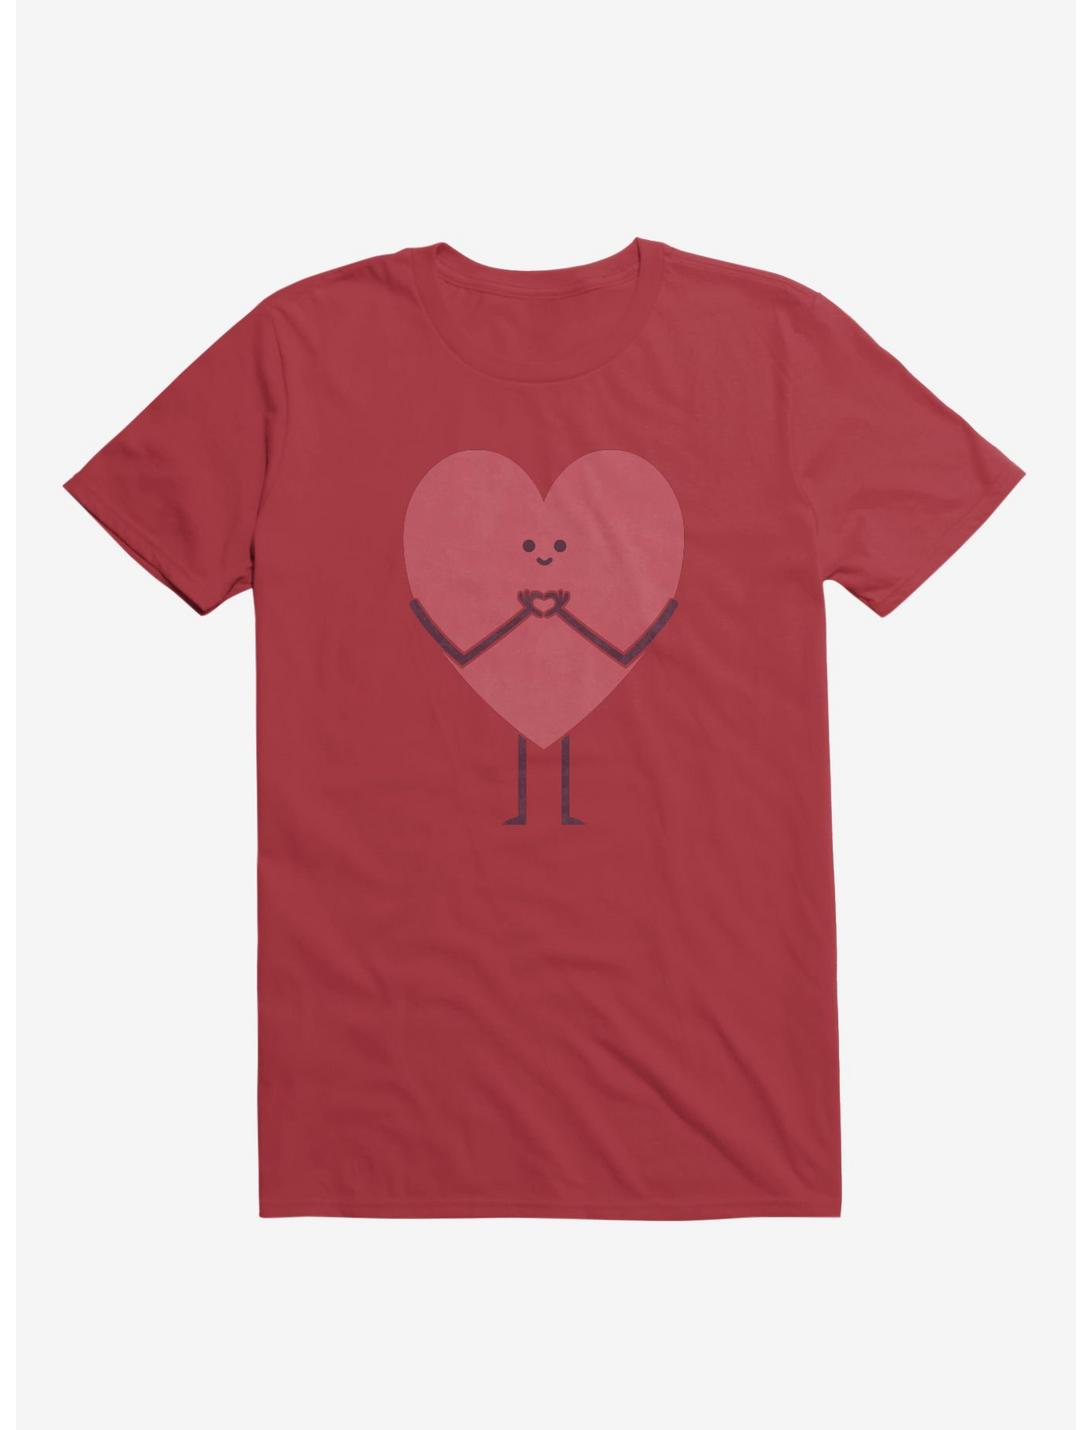 Heart Making Heart Hands Red T-Shirt, RED, hi-res